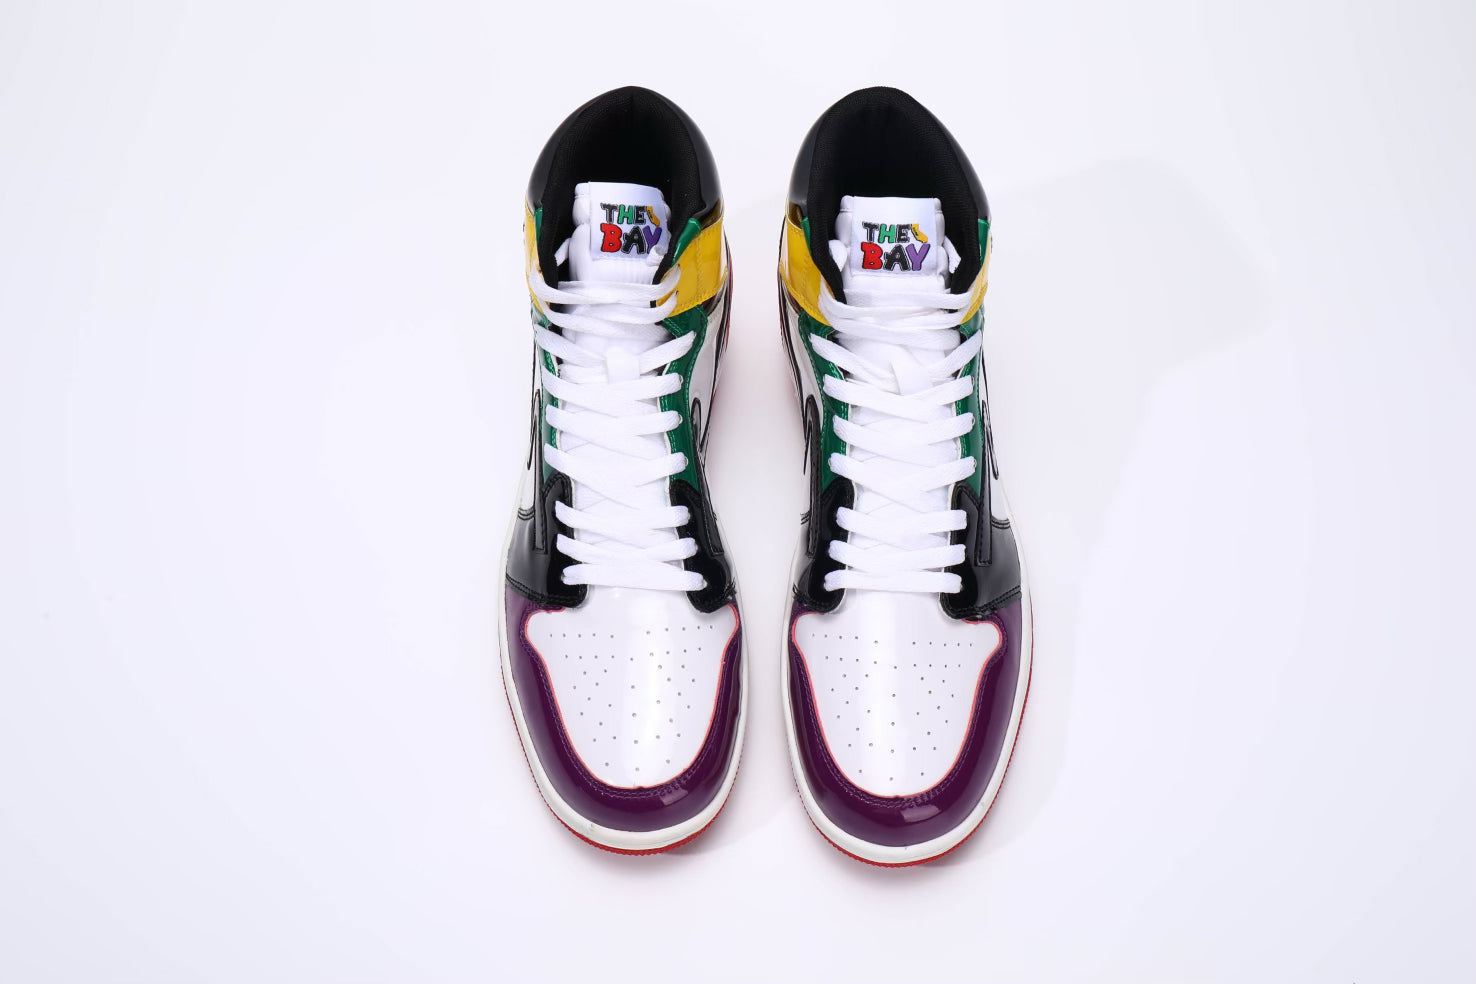 Shoes (Forever Patent Leather) - The Bay Hoodie